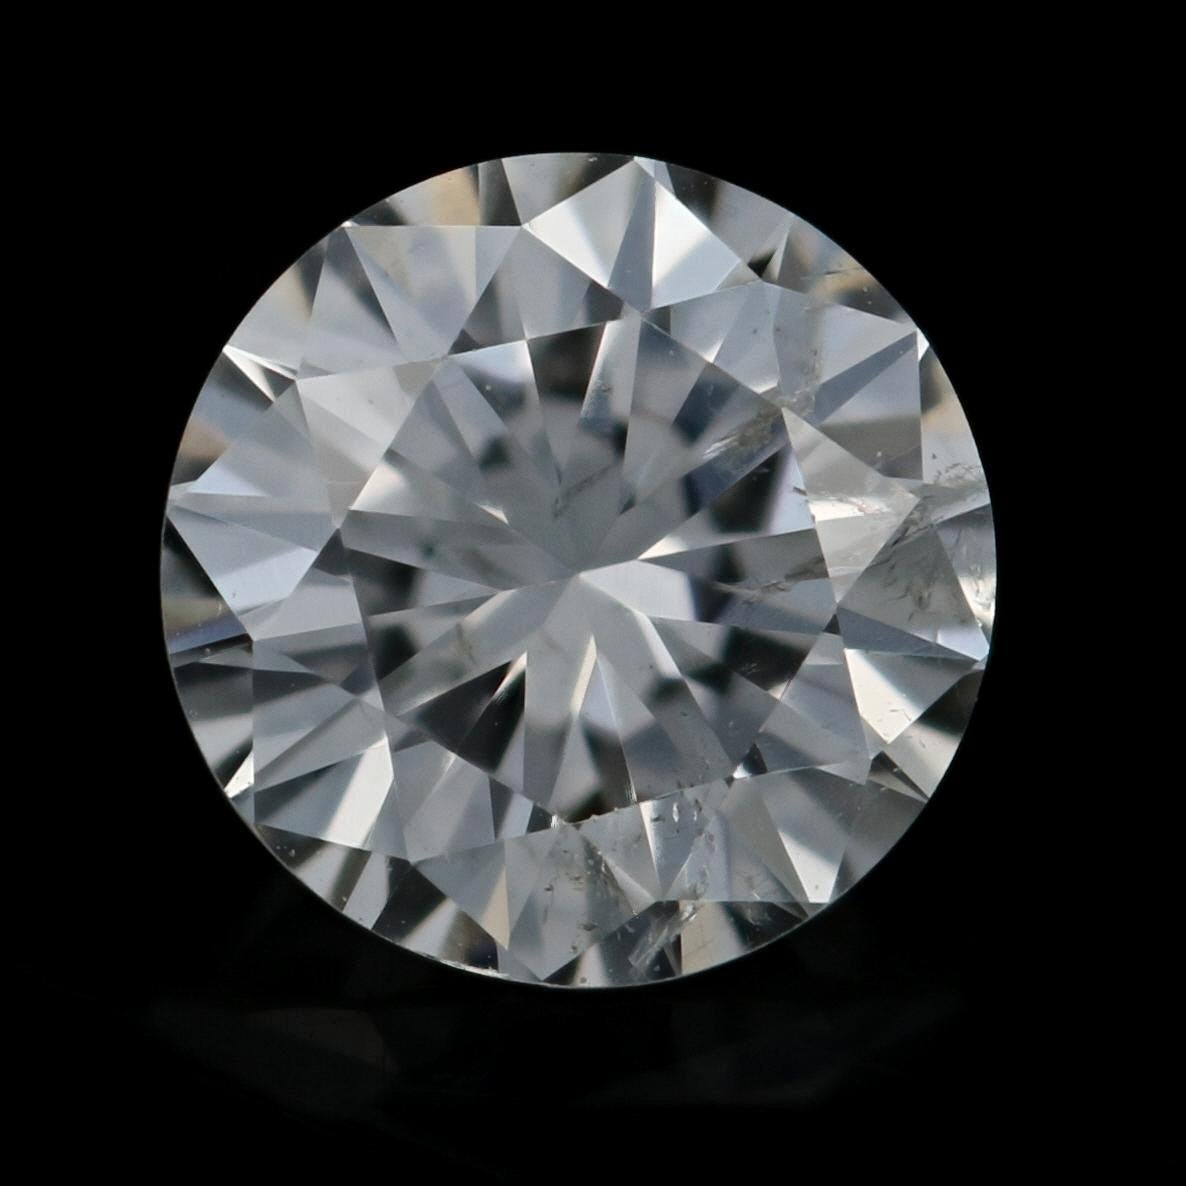 Weight: .51ct
Cut: Round Brilliant 
Color: F
Clarity: SI2 
Dimensions (mm): 5.16 - 5.20 x 3.15

GIA Report Number: 2181205486 

Condition: New  

Please check out the enlarged pictures.

Thank you for taking the time to read our description. If you